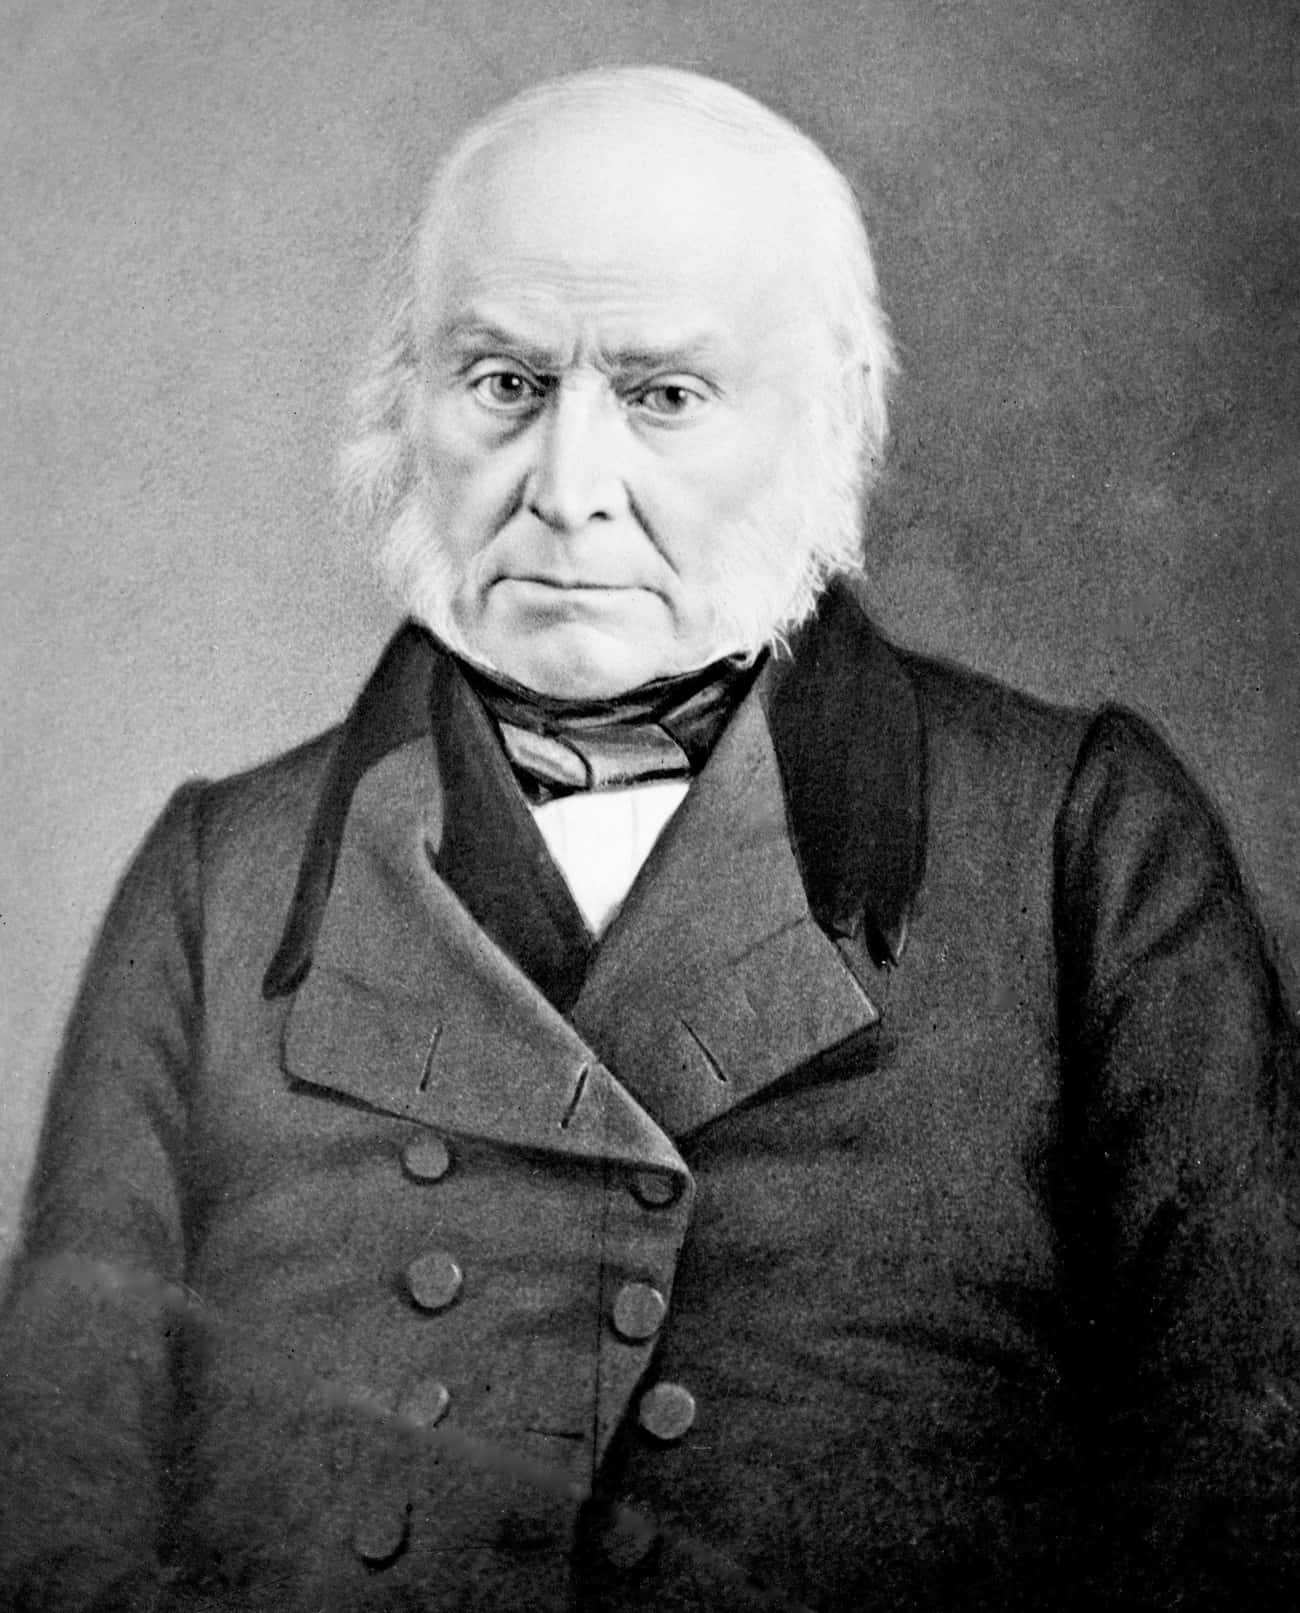 John Quincy Adams Only Agreed To Be Interviewed By A Woman After She Stole His Clothes